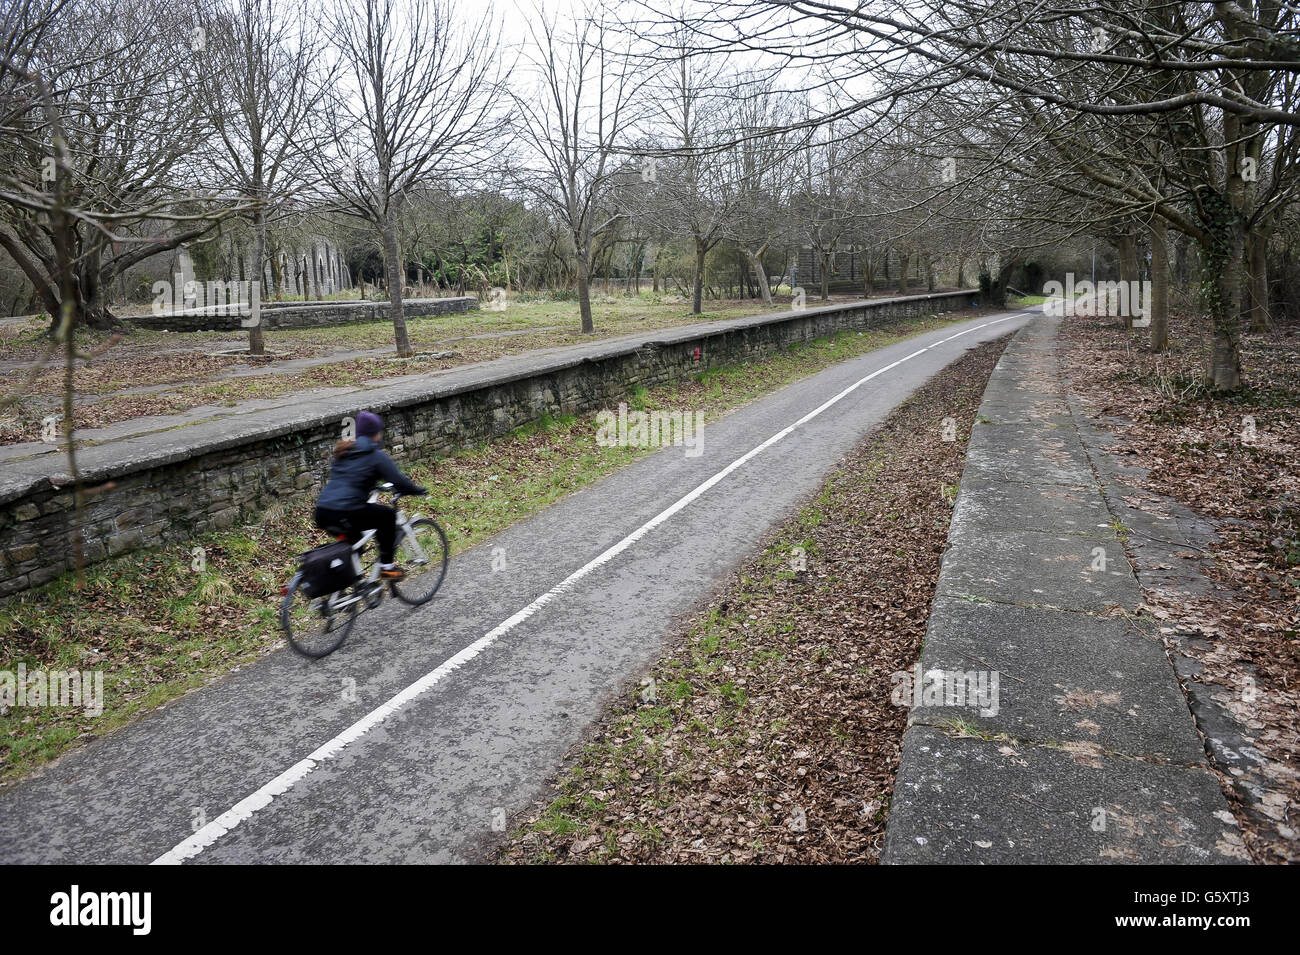 A cyclist passes the old Mangotsfield station on the Bristol & Bath railway path, which runs between the platforms. The Bristol & Bath Railway Path was constructed on the track bed of the former Midland Railway which closed for passenger traffic at the end of the 1960s. Between 1979 and 1986, the railway line was converted into the Railway Path by cycling charity Sustrans. The first stretch was between Bath and Bitton where the campaign group, Cyclebag obtained planning permission to create the 2m wide dust track. The route then developed westwards with Bristol being the last section. This Stock Photo